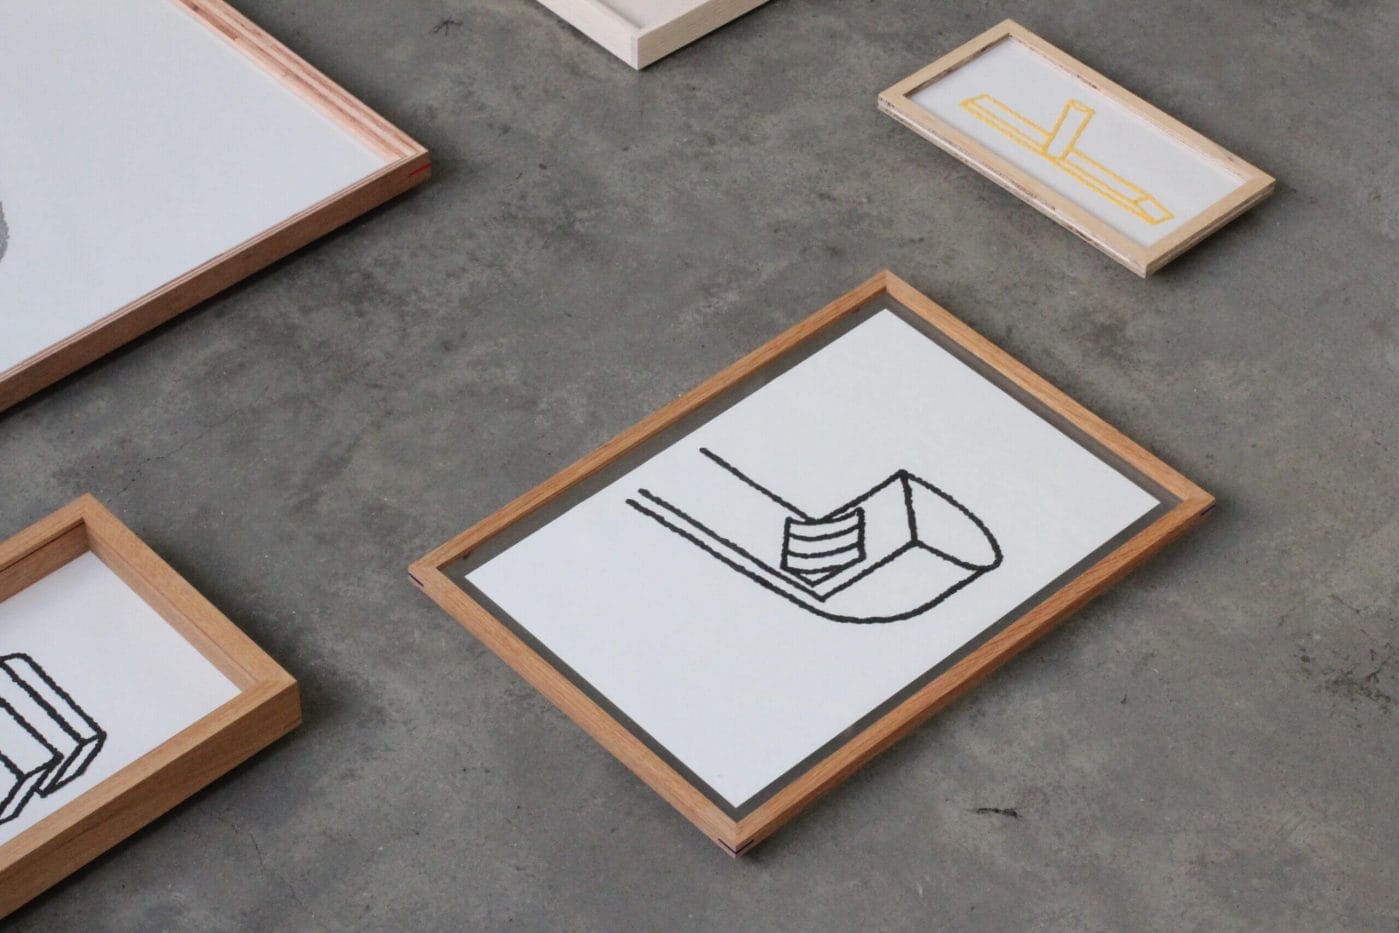 simple wood productによる額の展示販売会「Frame and Drawing」。吉行良平によるドローイングも